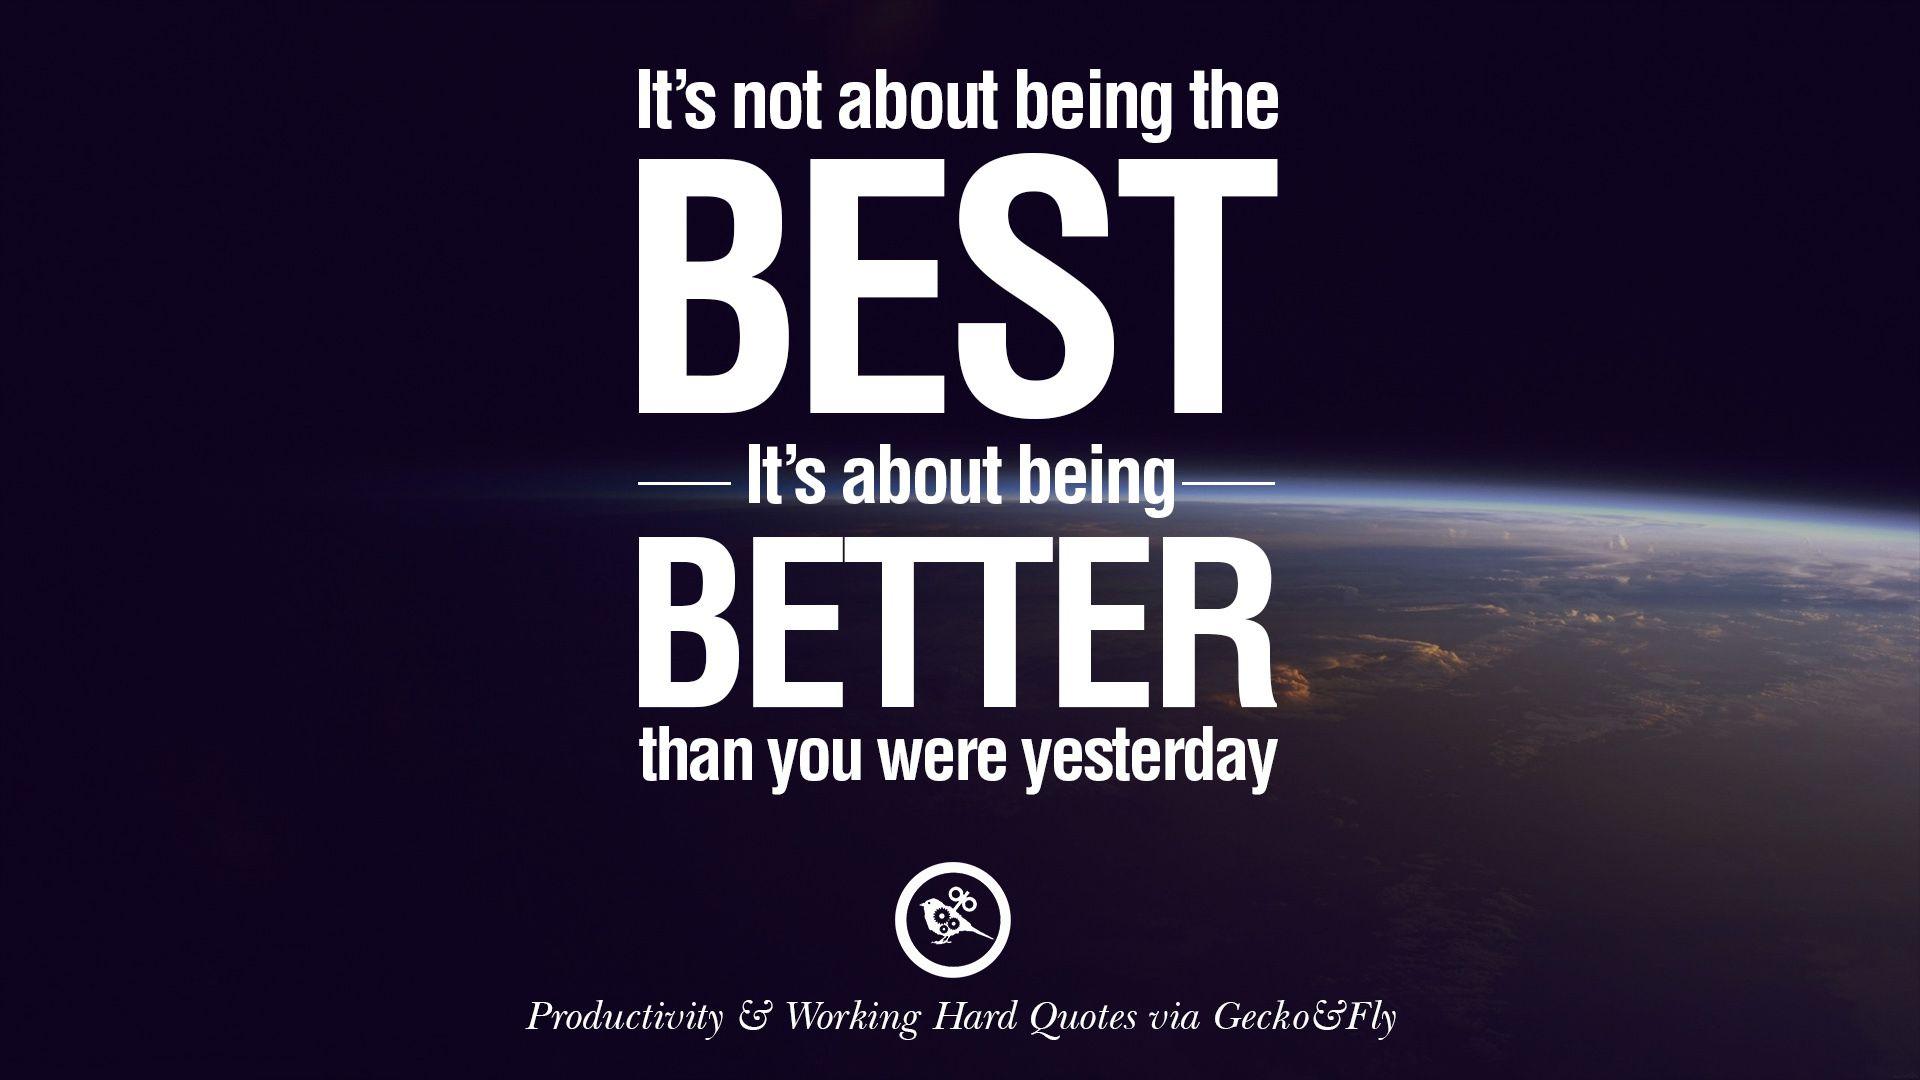 Uplifting Quotes On Increasing Productivity And Working Hard